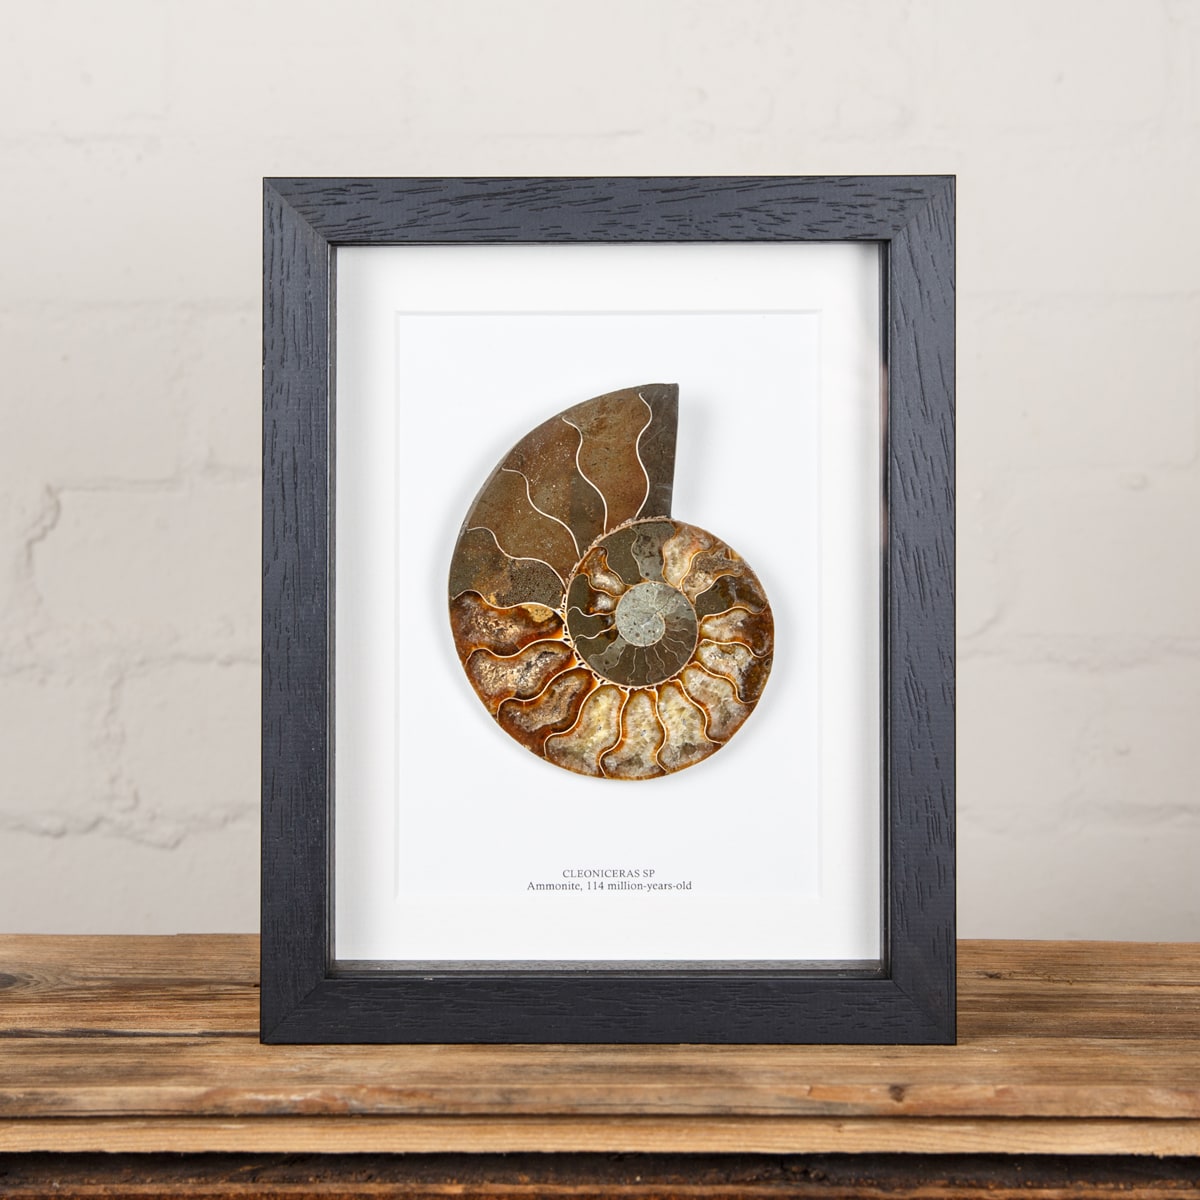 Minibeast Large Ammonite Cut and Polished Fossil in Box Frame (Cleoniceras sp)